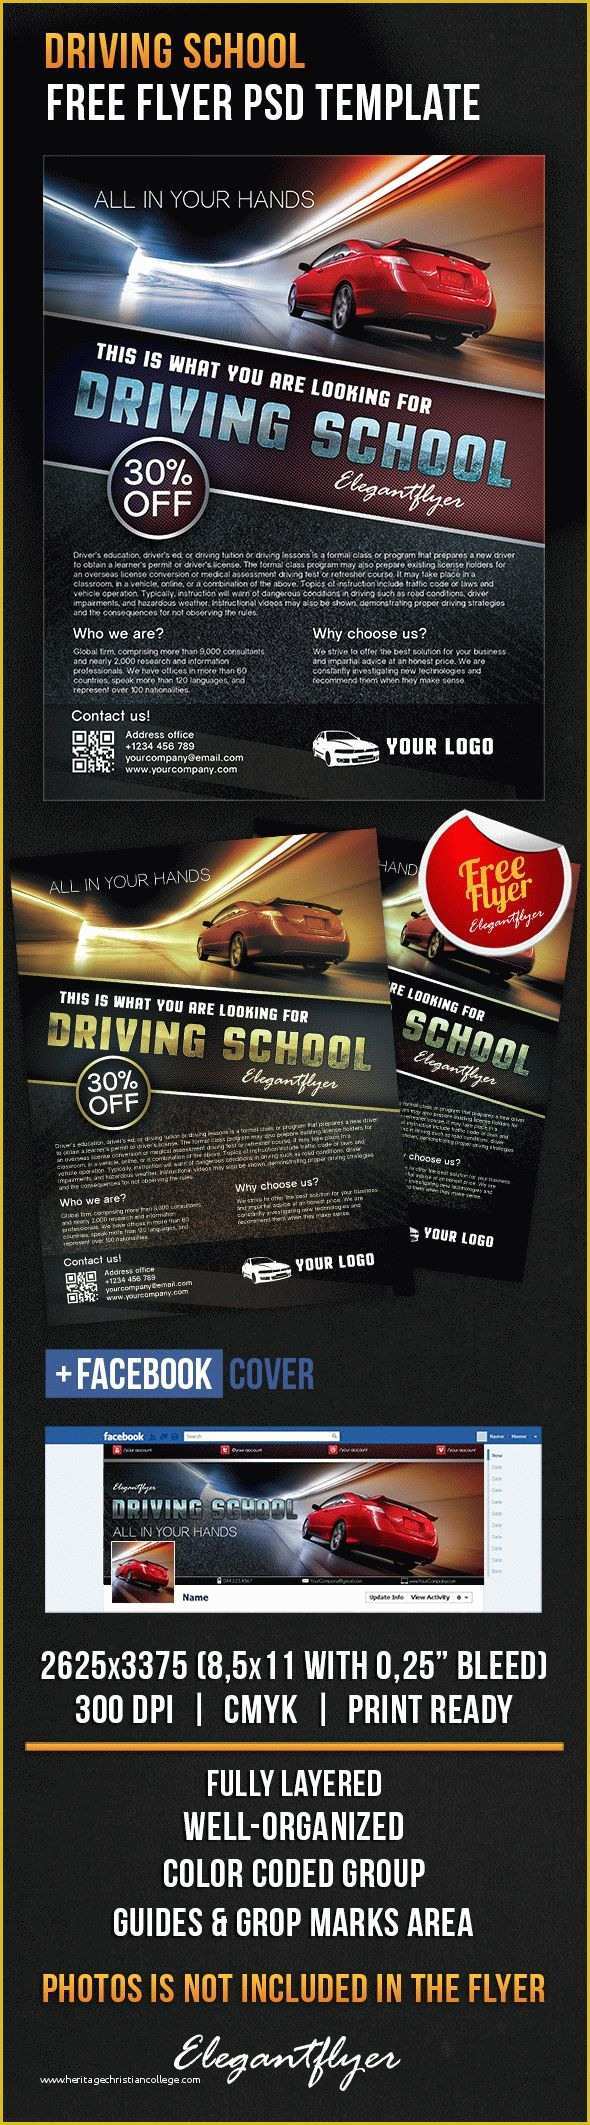 Facebook Ad Template Psd Free Of Driving School – Free Flyer Psd Template – by Elegantflyer